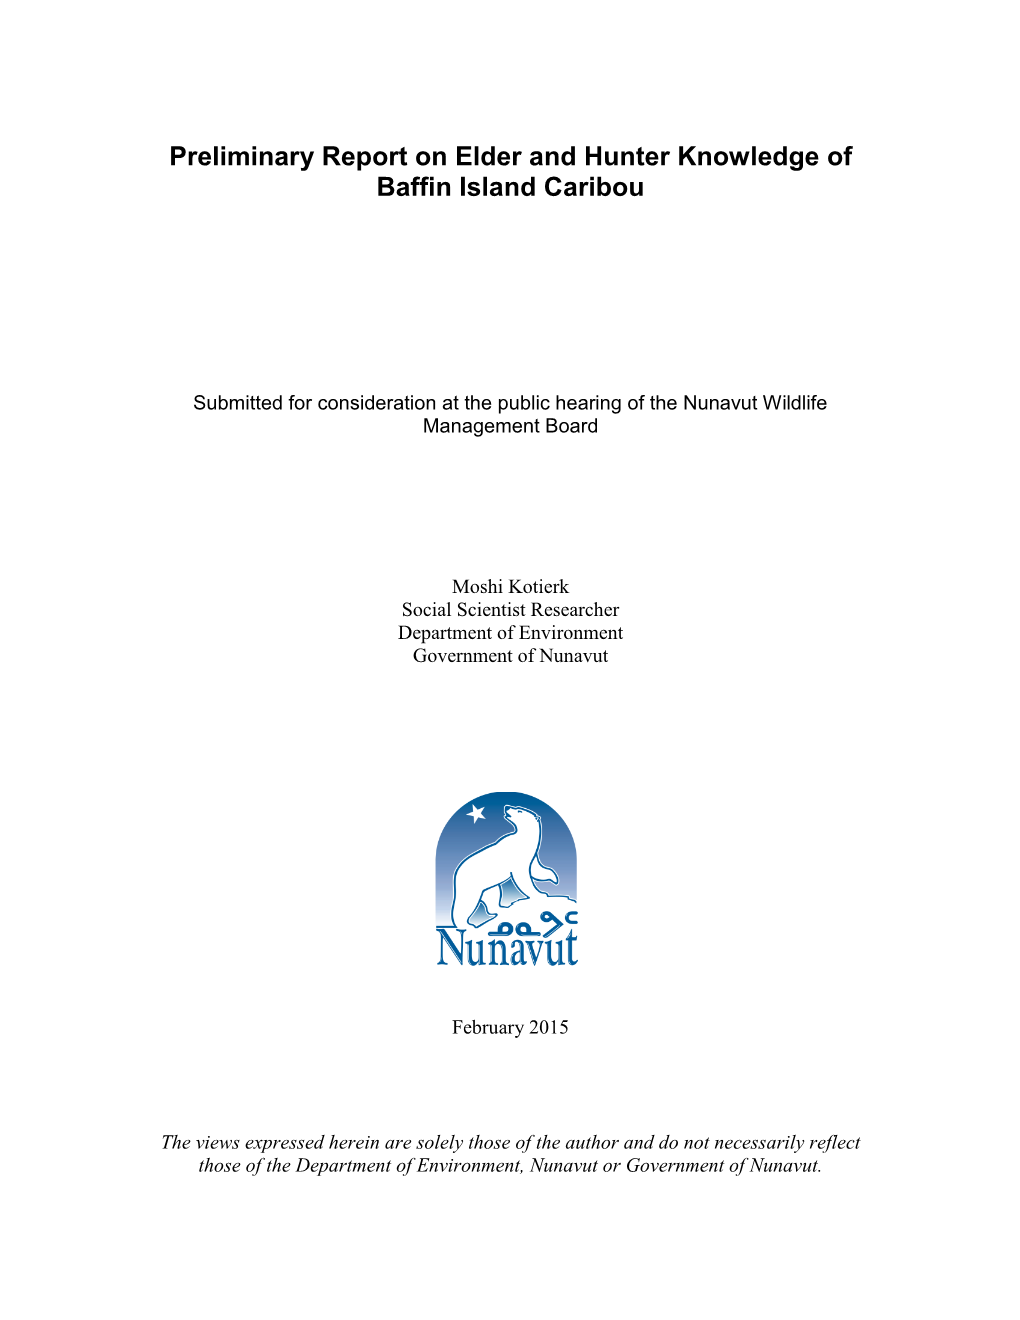 Preliminary Report on Elder and Hunter Knowledge of Baffin Island Caribou